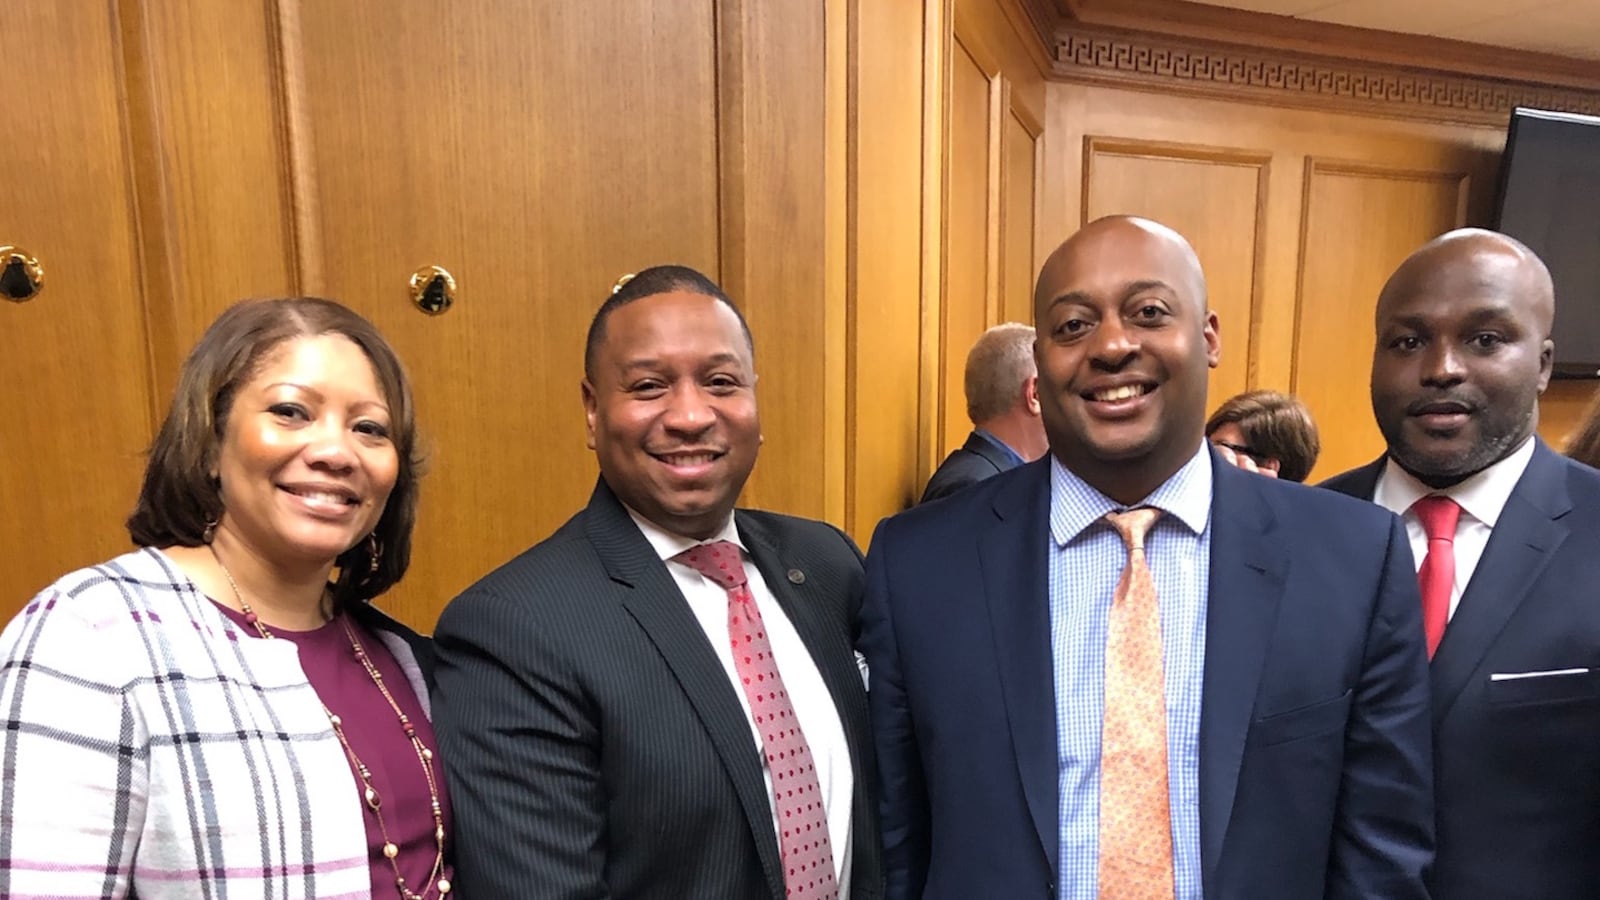 Superintendents or interim directors from four districts attended Tuesday’s meeting with Gov. Bill Lee. From left: Adrienne Battle of Nashville, Joris Ray from Memphis, Eric Jones from Jackson, and Bryan Johnson of Chattanooga (Photo courtesy of Shelby County Schools)